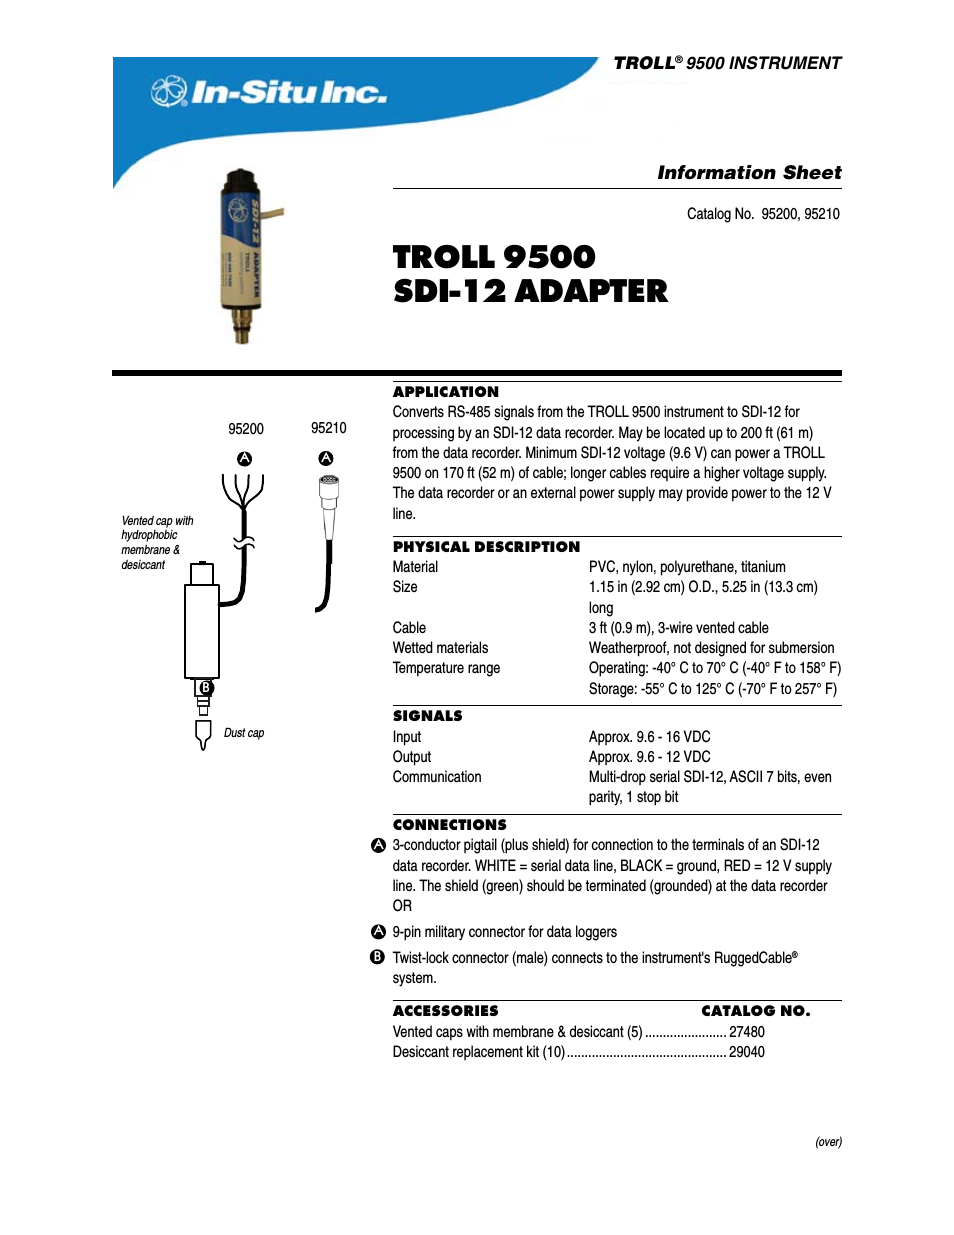 RS485 to SDI-12 Adapter for the TROLL 9500